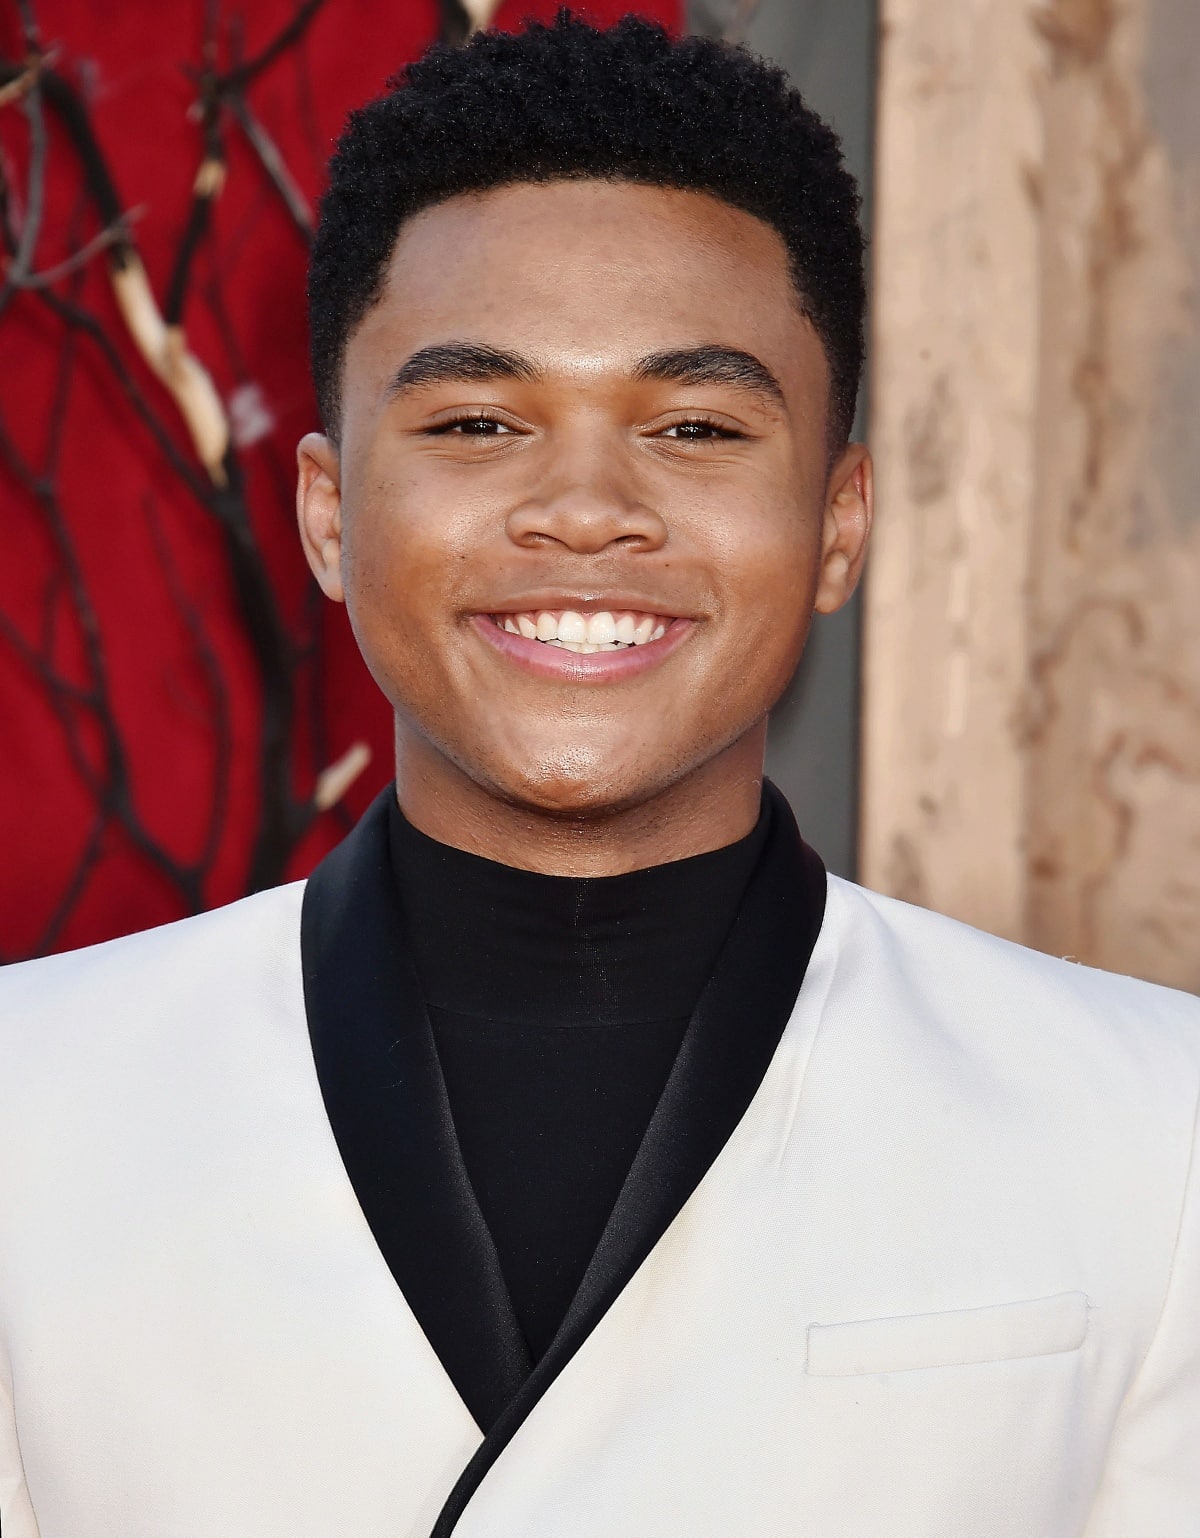 Chosen Jacobs, born July 1, 2001, is an American actor and singer best known for his recurring role as Will Grover on the CBS television series "Hawaii Five-0" and his portrayal of Mike Hanlon in the 2017 film adaptation of Stephen King's novel "It" and its sequel "It Chapter Two"